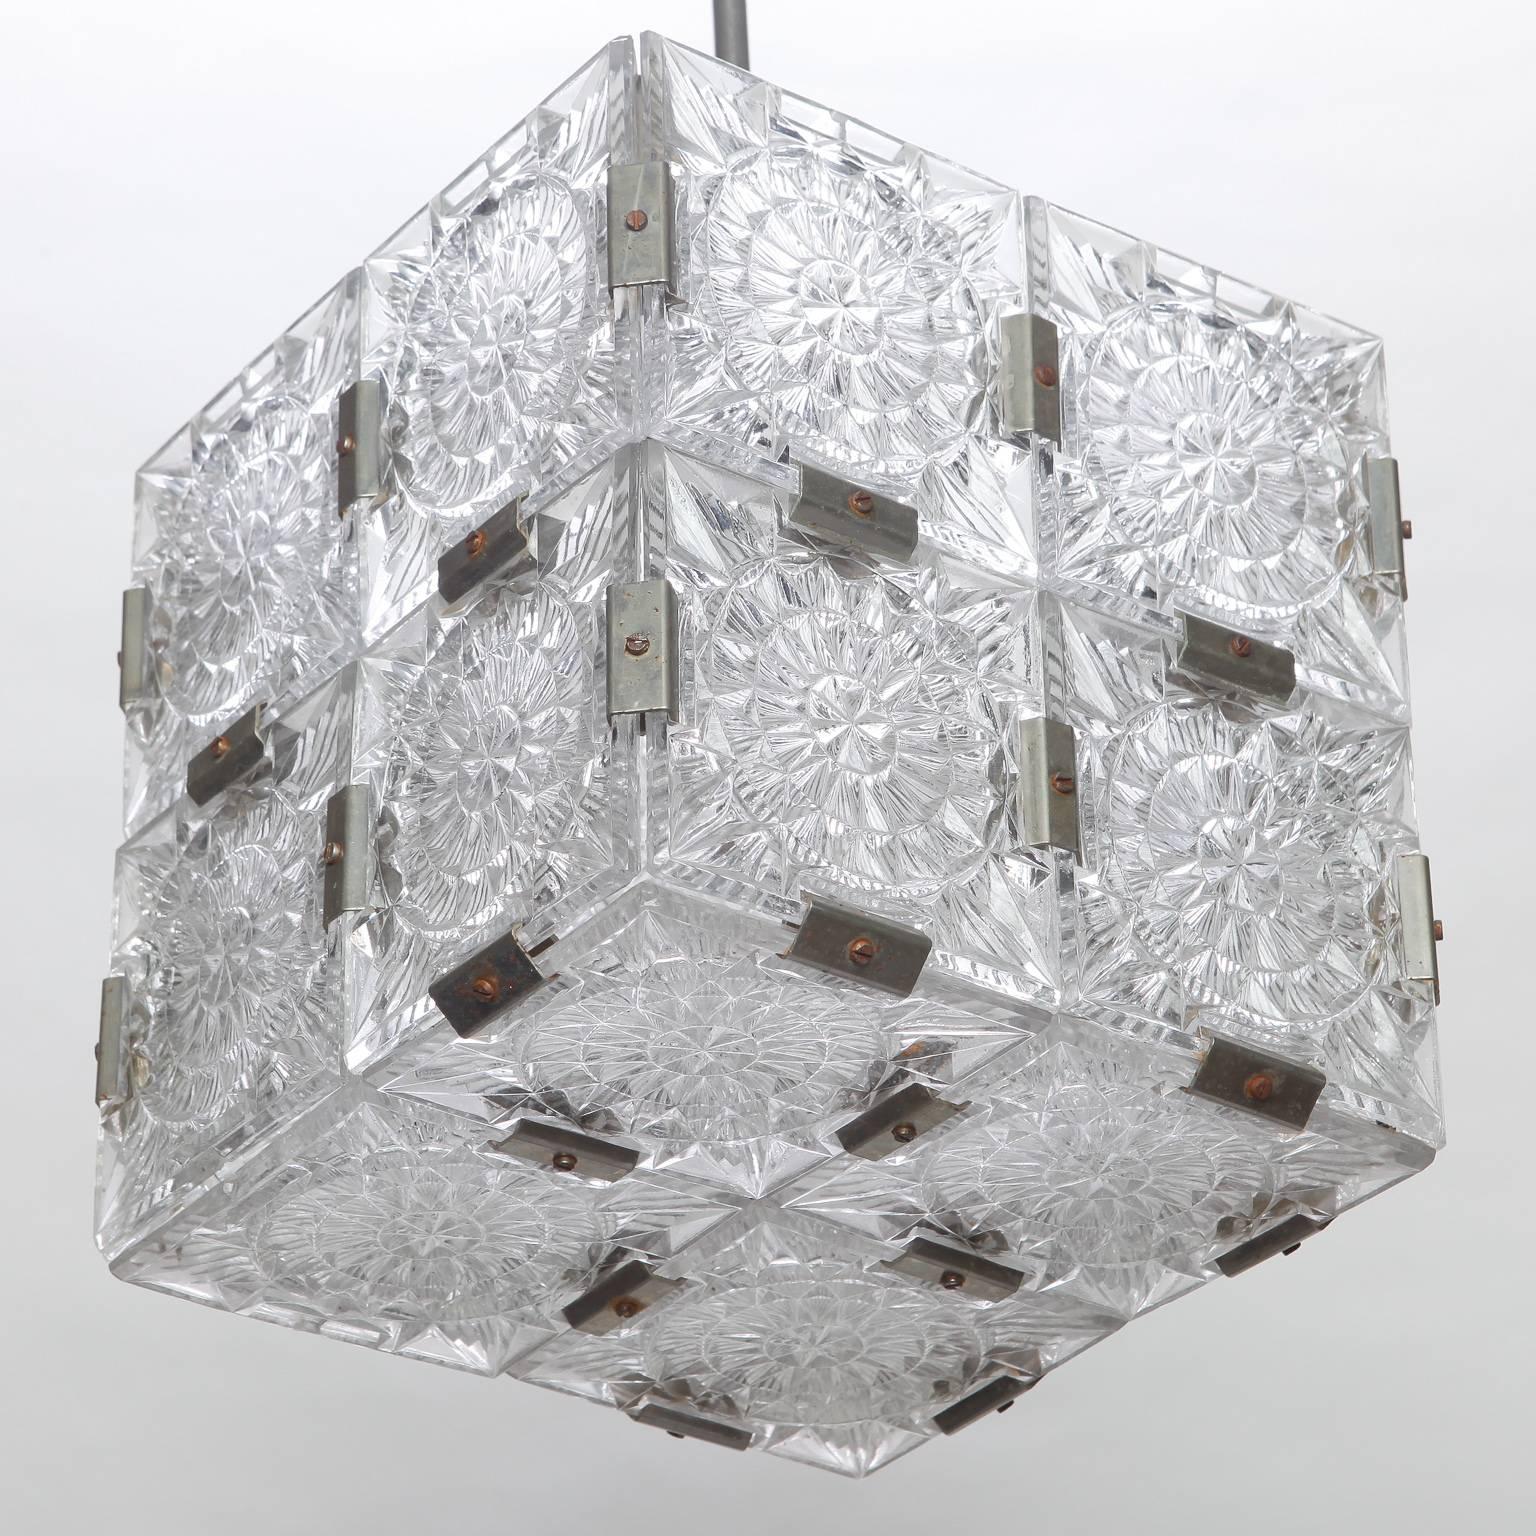 Cube shaped suspended cube light, circa 1970s made of clear molded glass panels and nickel metal joiners in the style of Kalmar of Austria. Dimensions shown are for glass fixture only, comes with adjustable rod and ceiling cap. New wiring for US